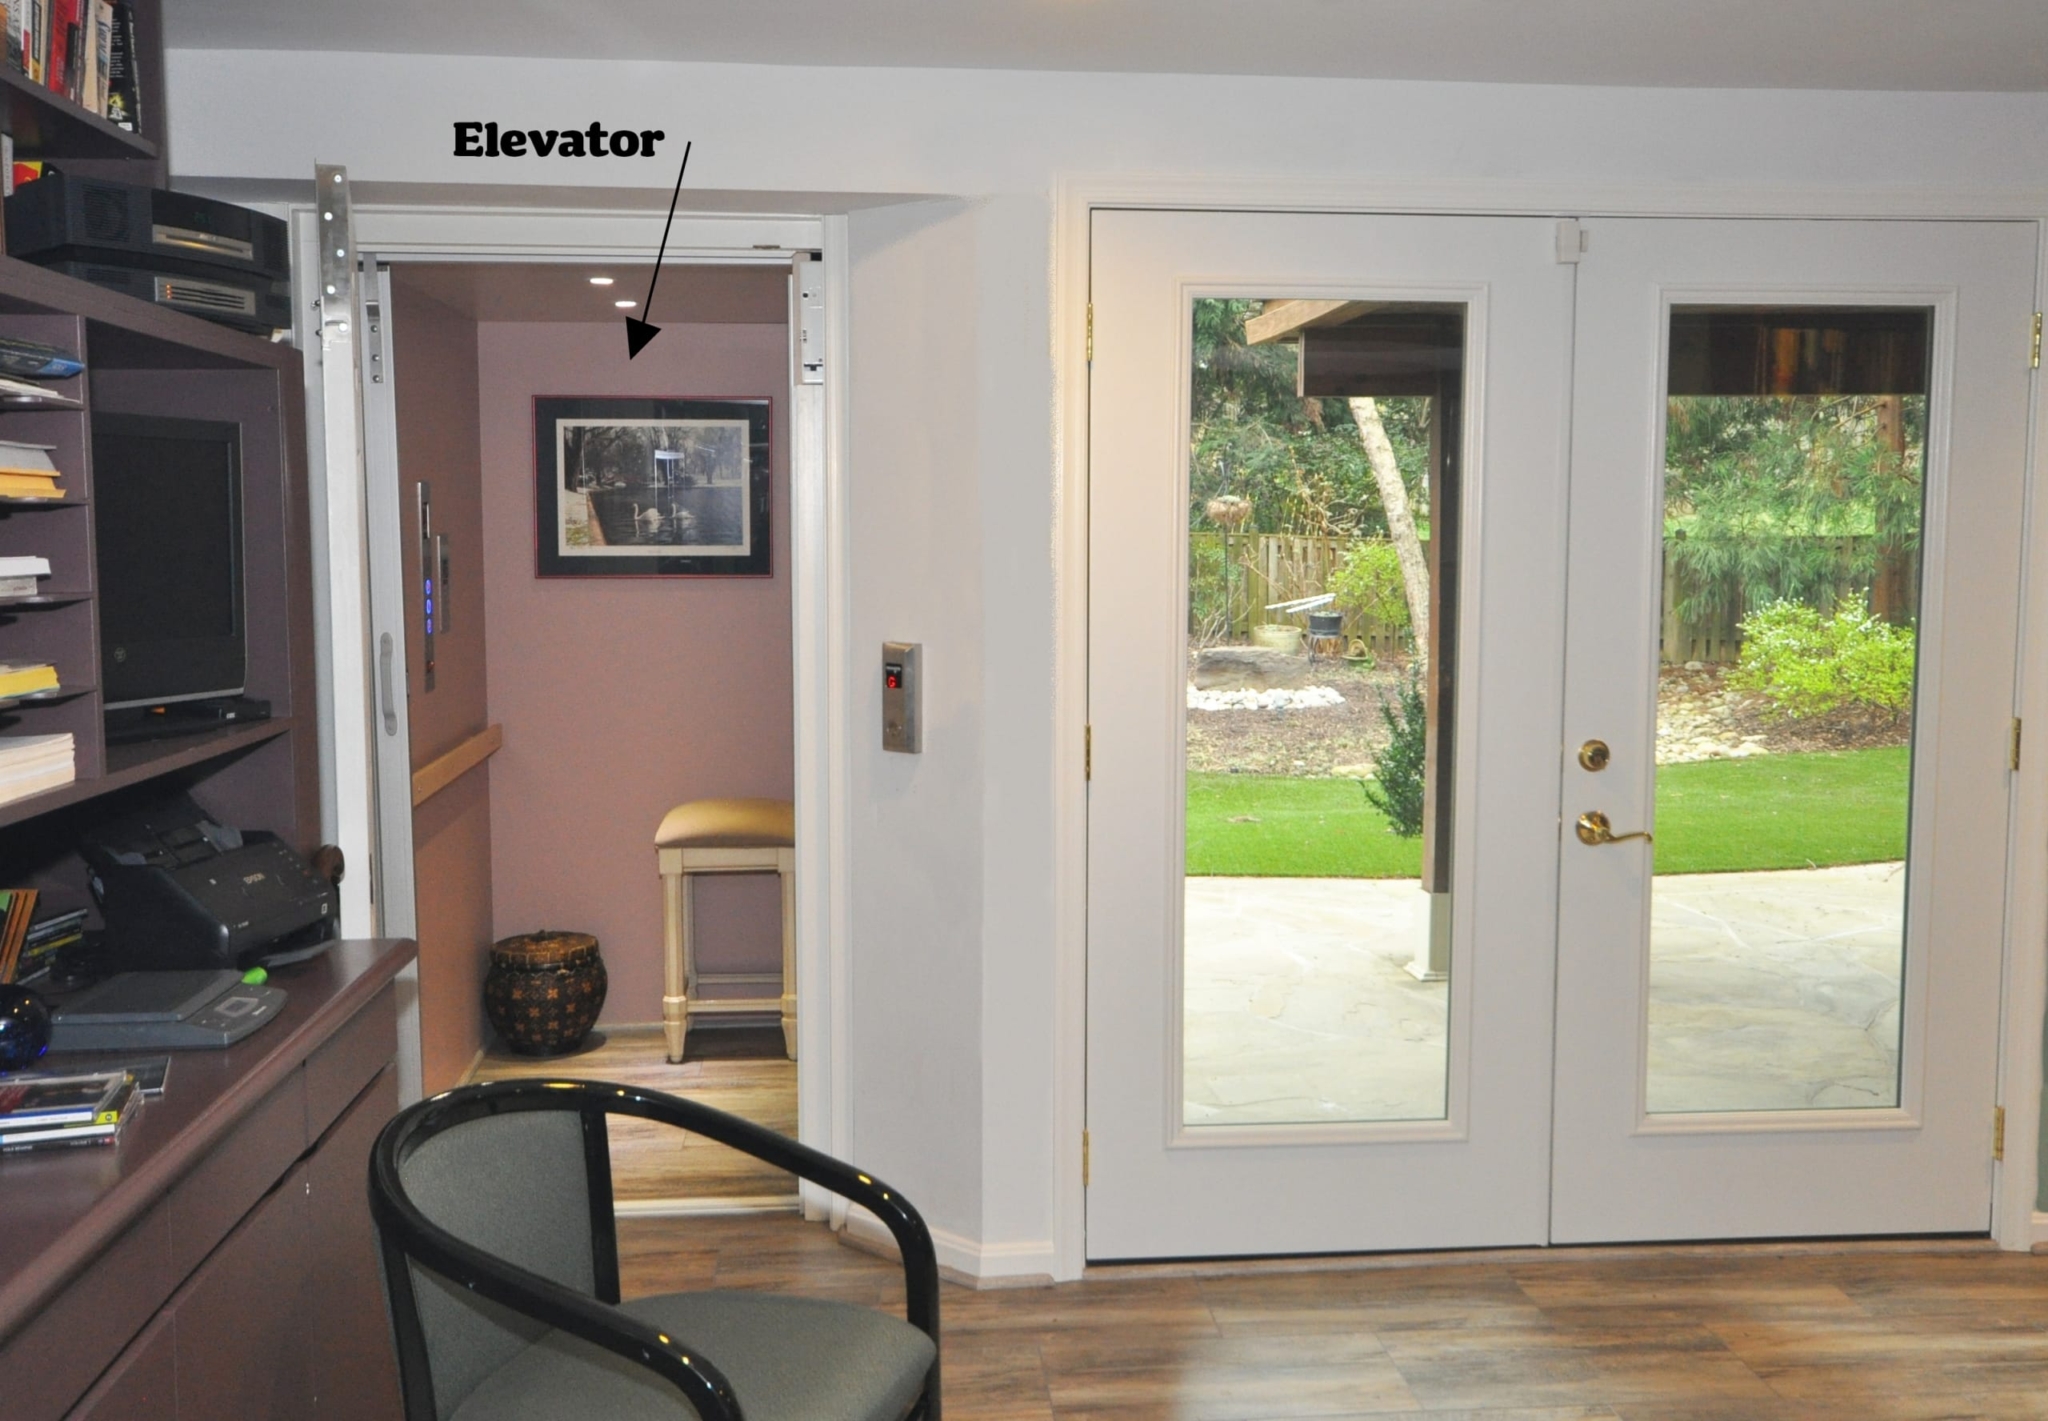 Northern VA home remodeling with elevator